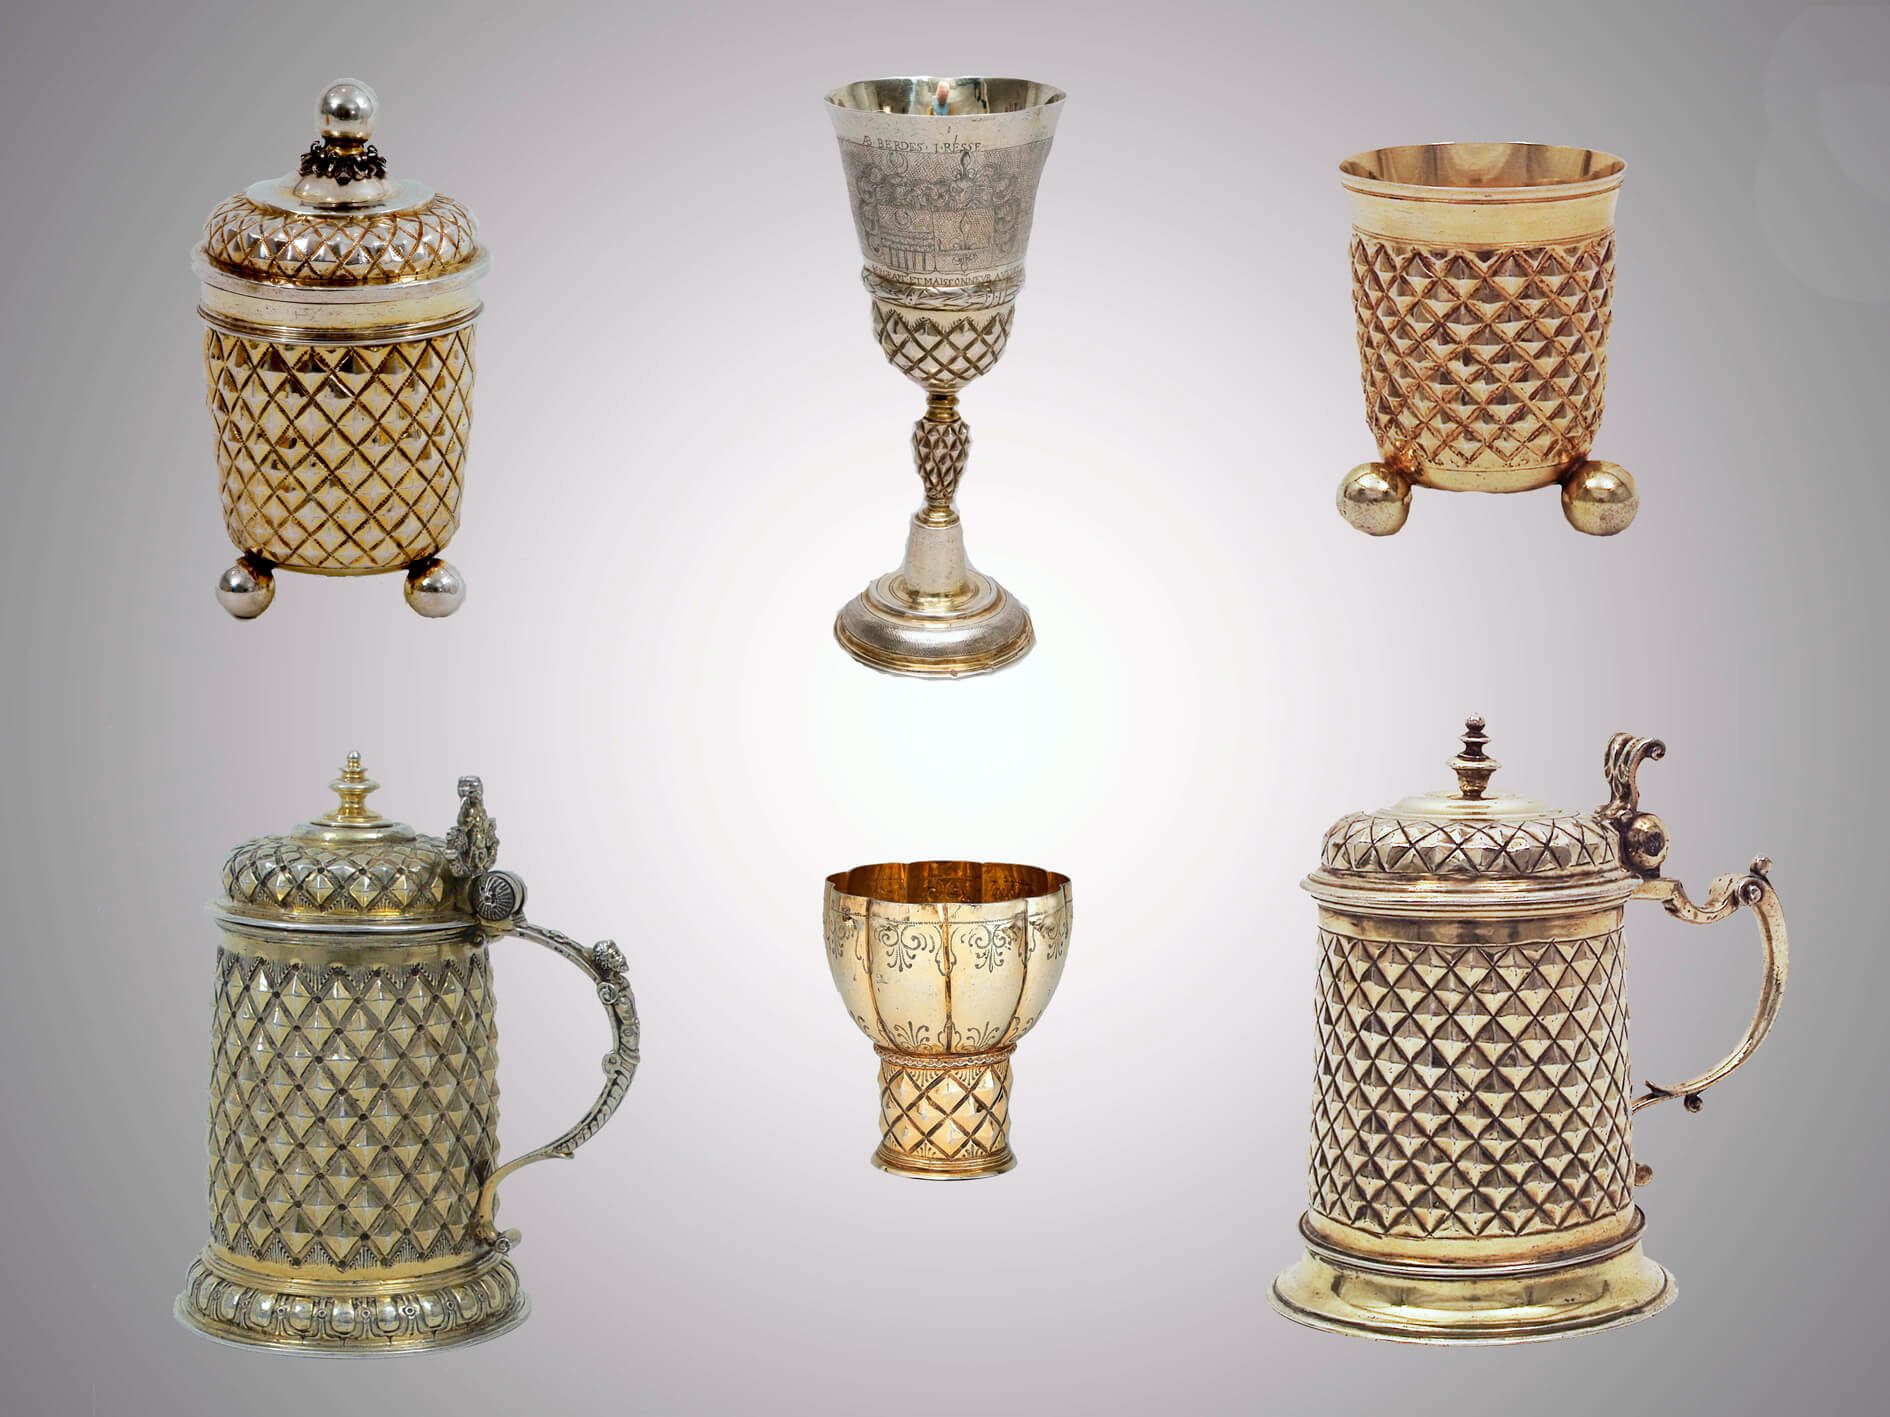 A GERMAN LARGE SILVER-GILT CUP AND COVER